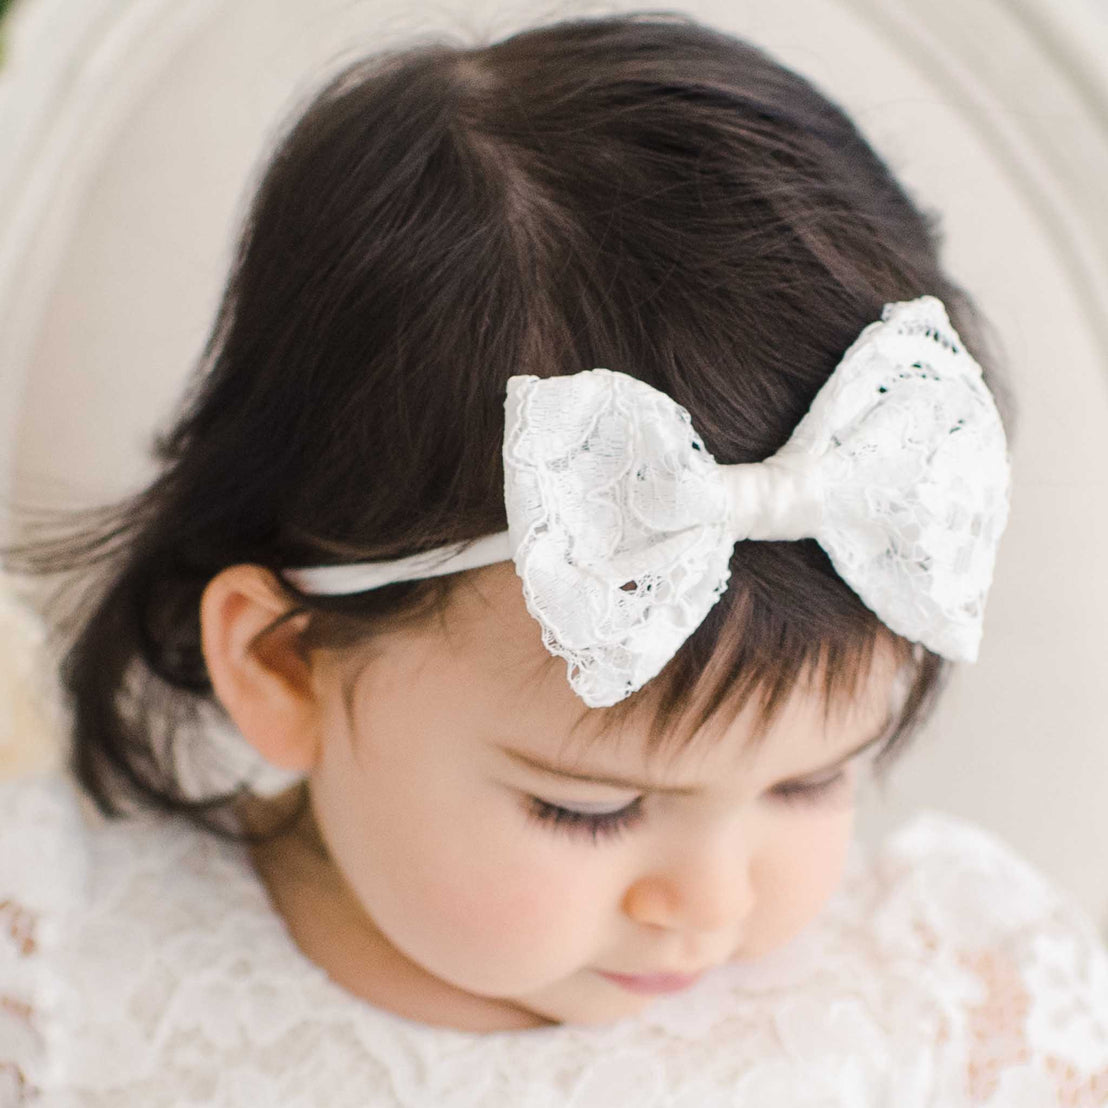 Close-up of a baby girl with dark hair wearing a Rose Headband, focusing on her gently closed eyes and detailed outfit for baptism.